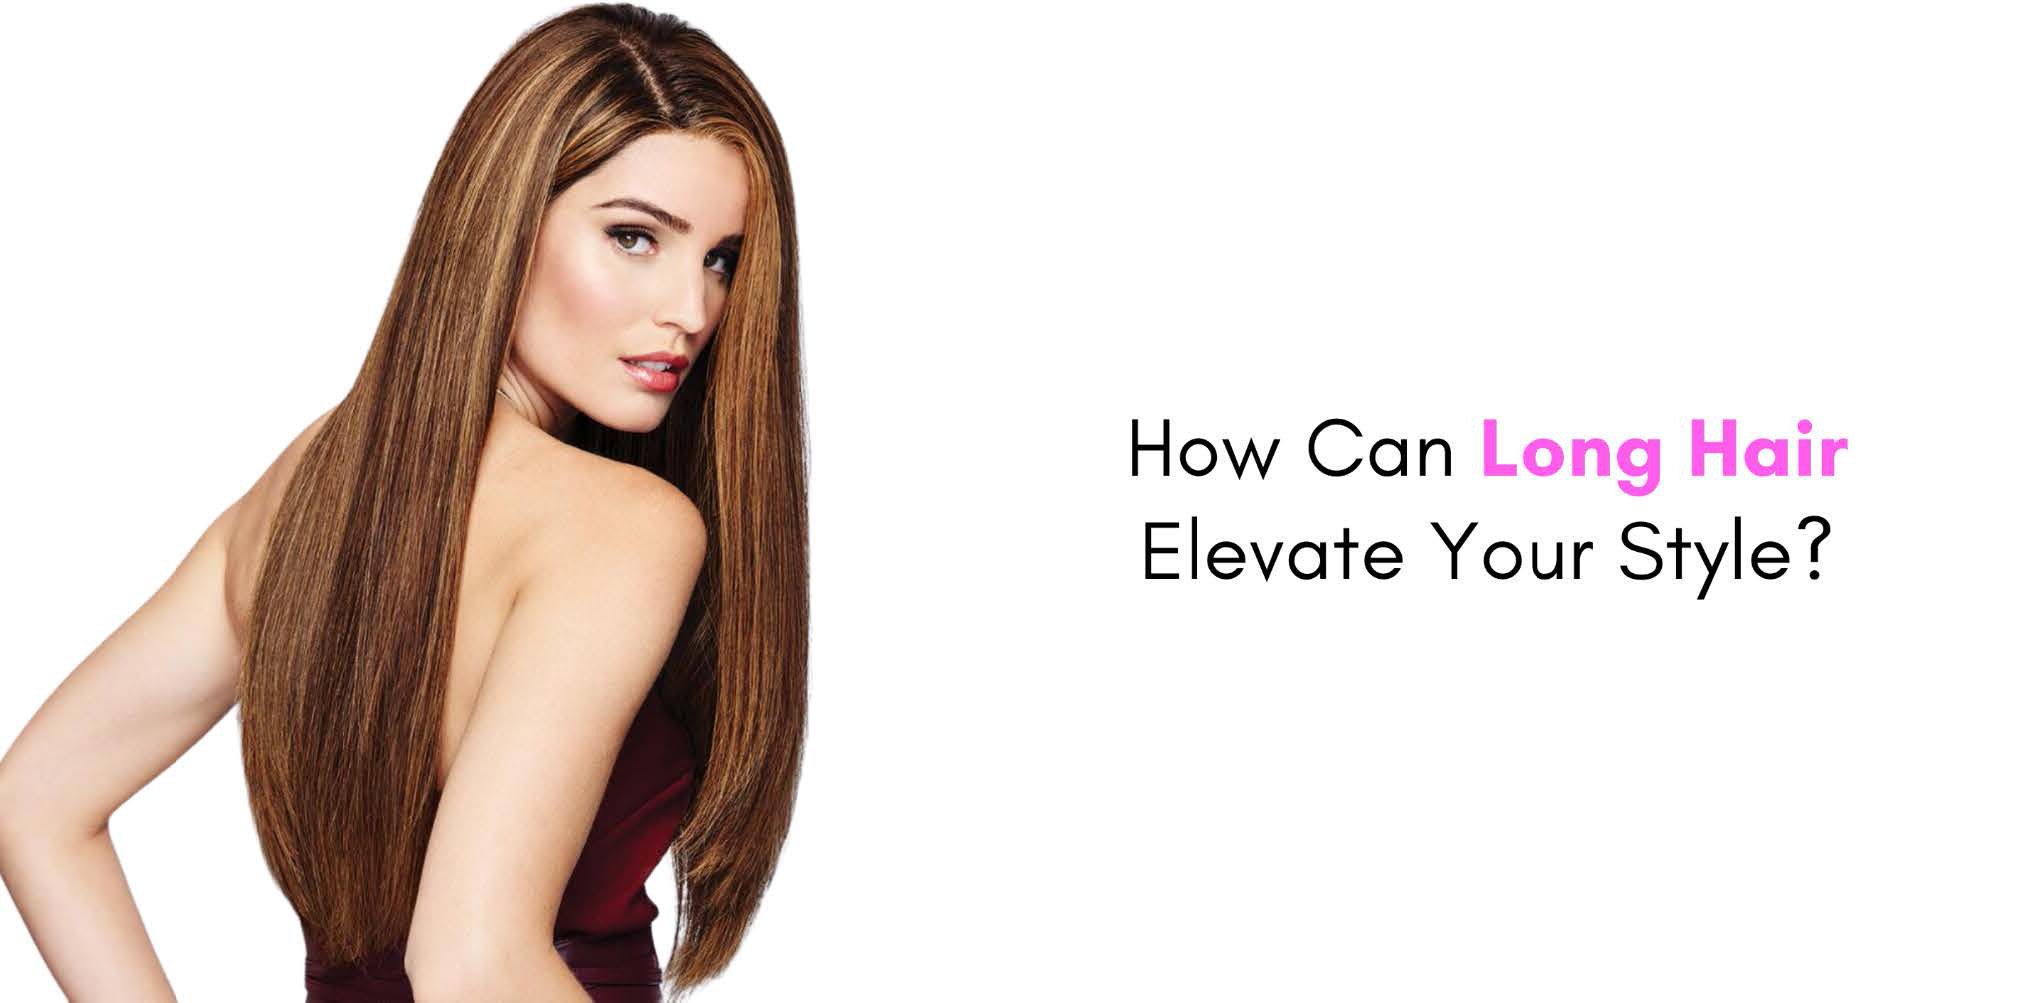 How can Long Hair Elevate your style